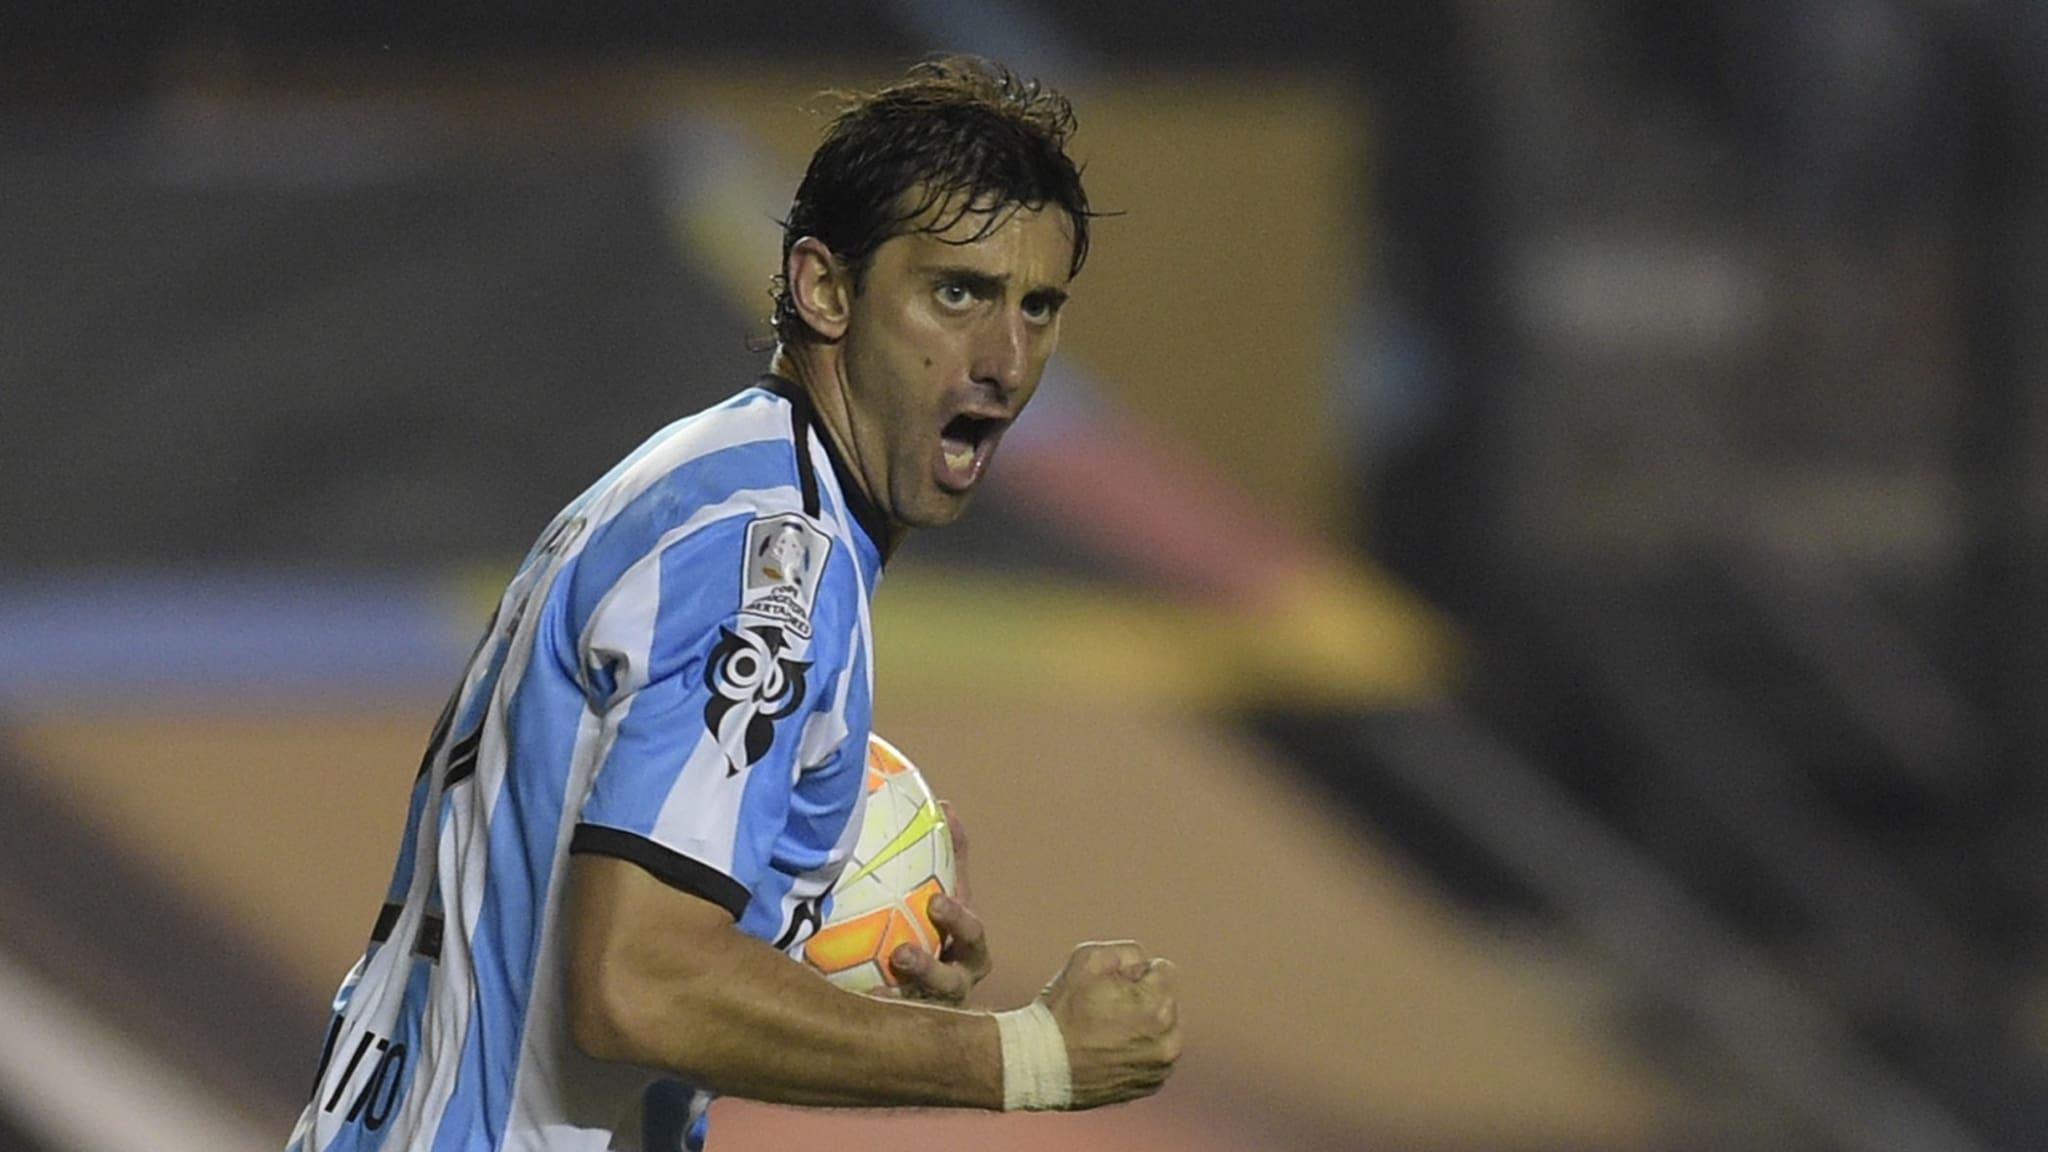 Diego Milito returns to his roots